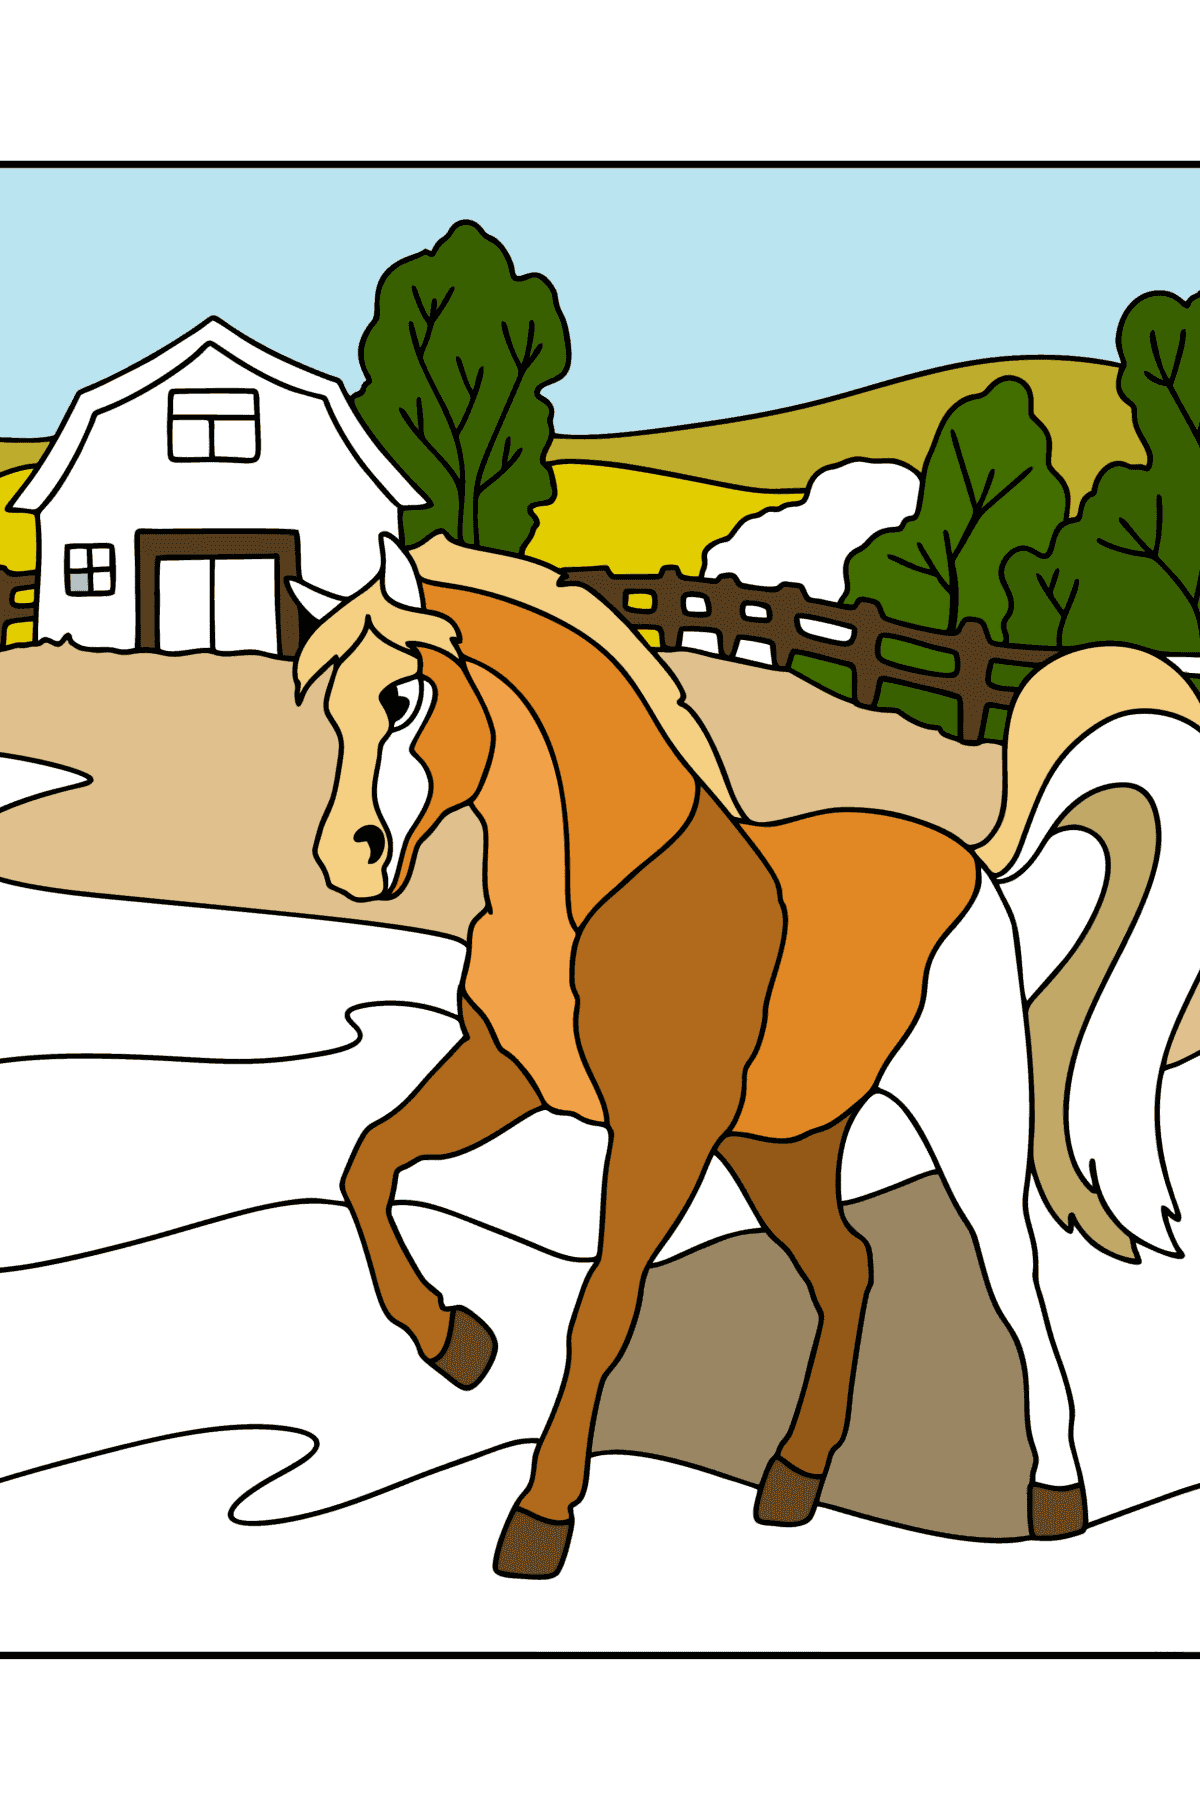 Horse on farm сoloring page - Coloring Pages for Kids